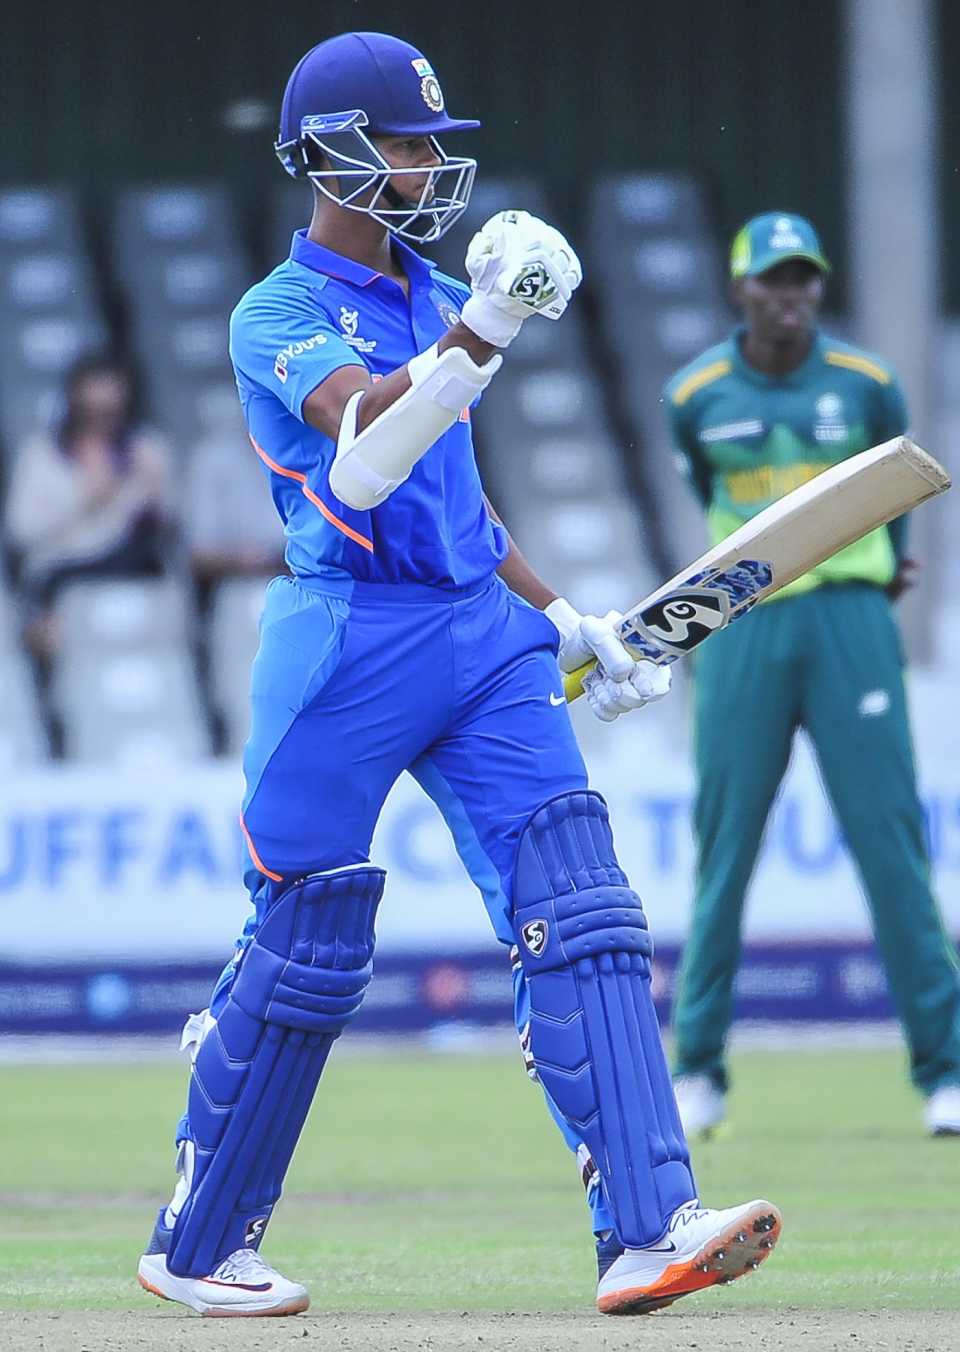 Yashasvi Jaiswal played a crucial role in India Under-19's win, South Africa v India, 2nd Youth ODI, East London, December 28, 2019